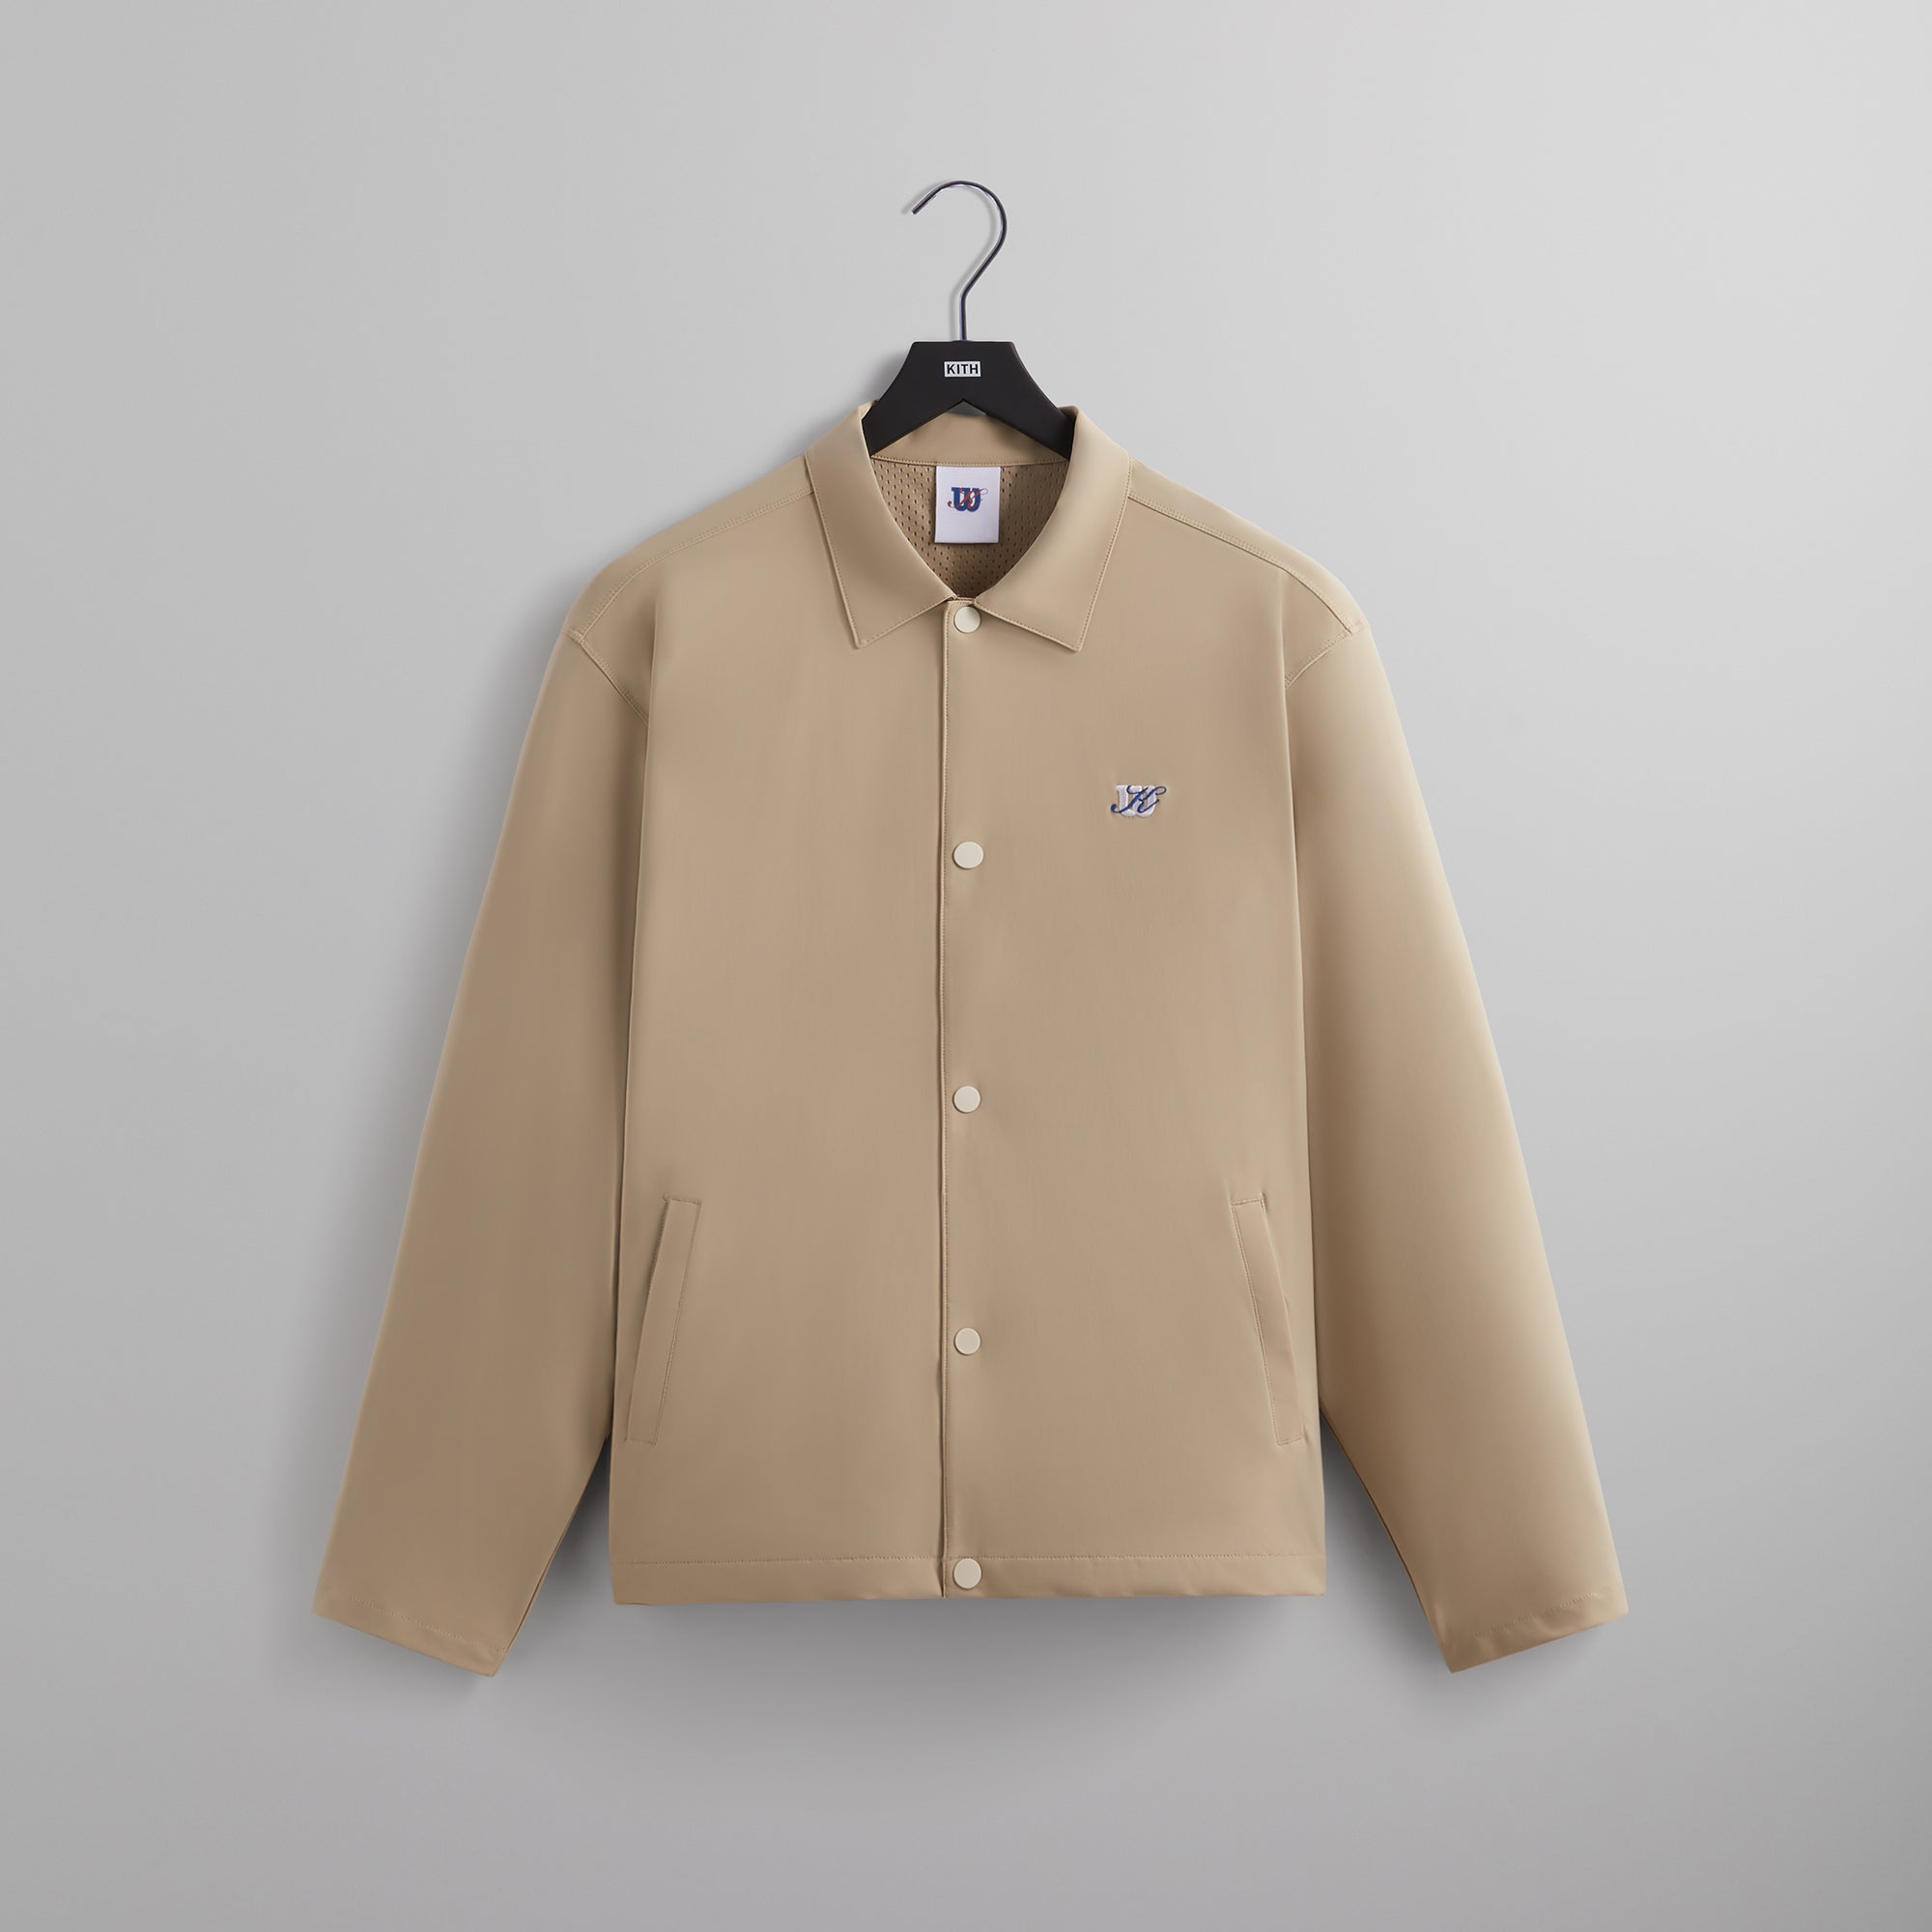 Kith for Wilson Midway Coaches Jacket - Seedpearl